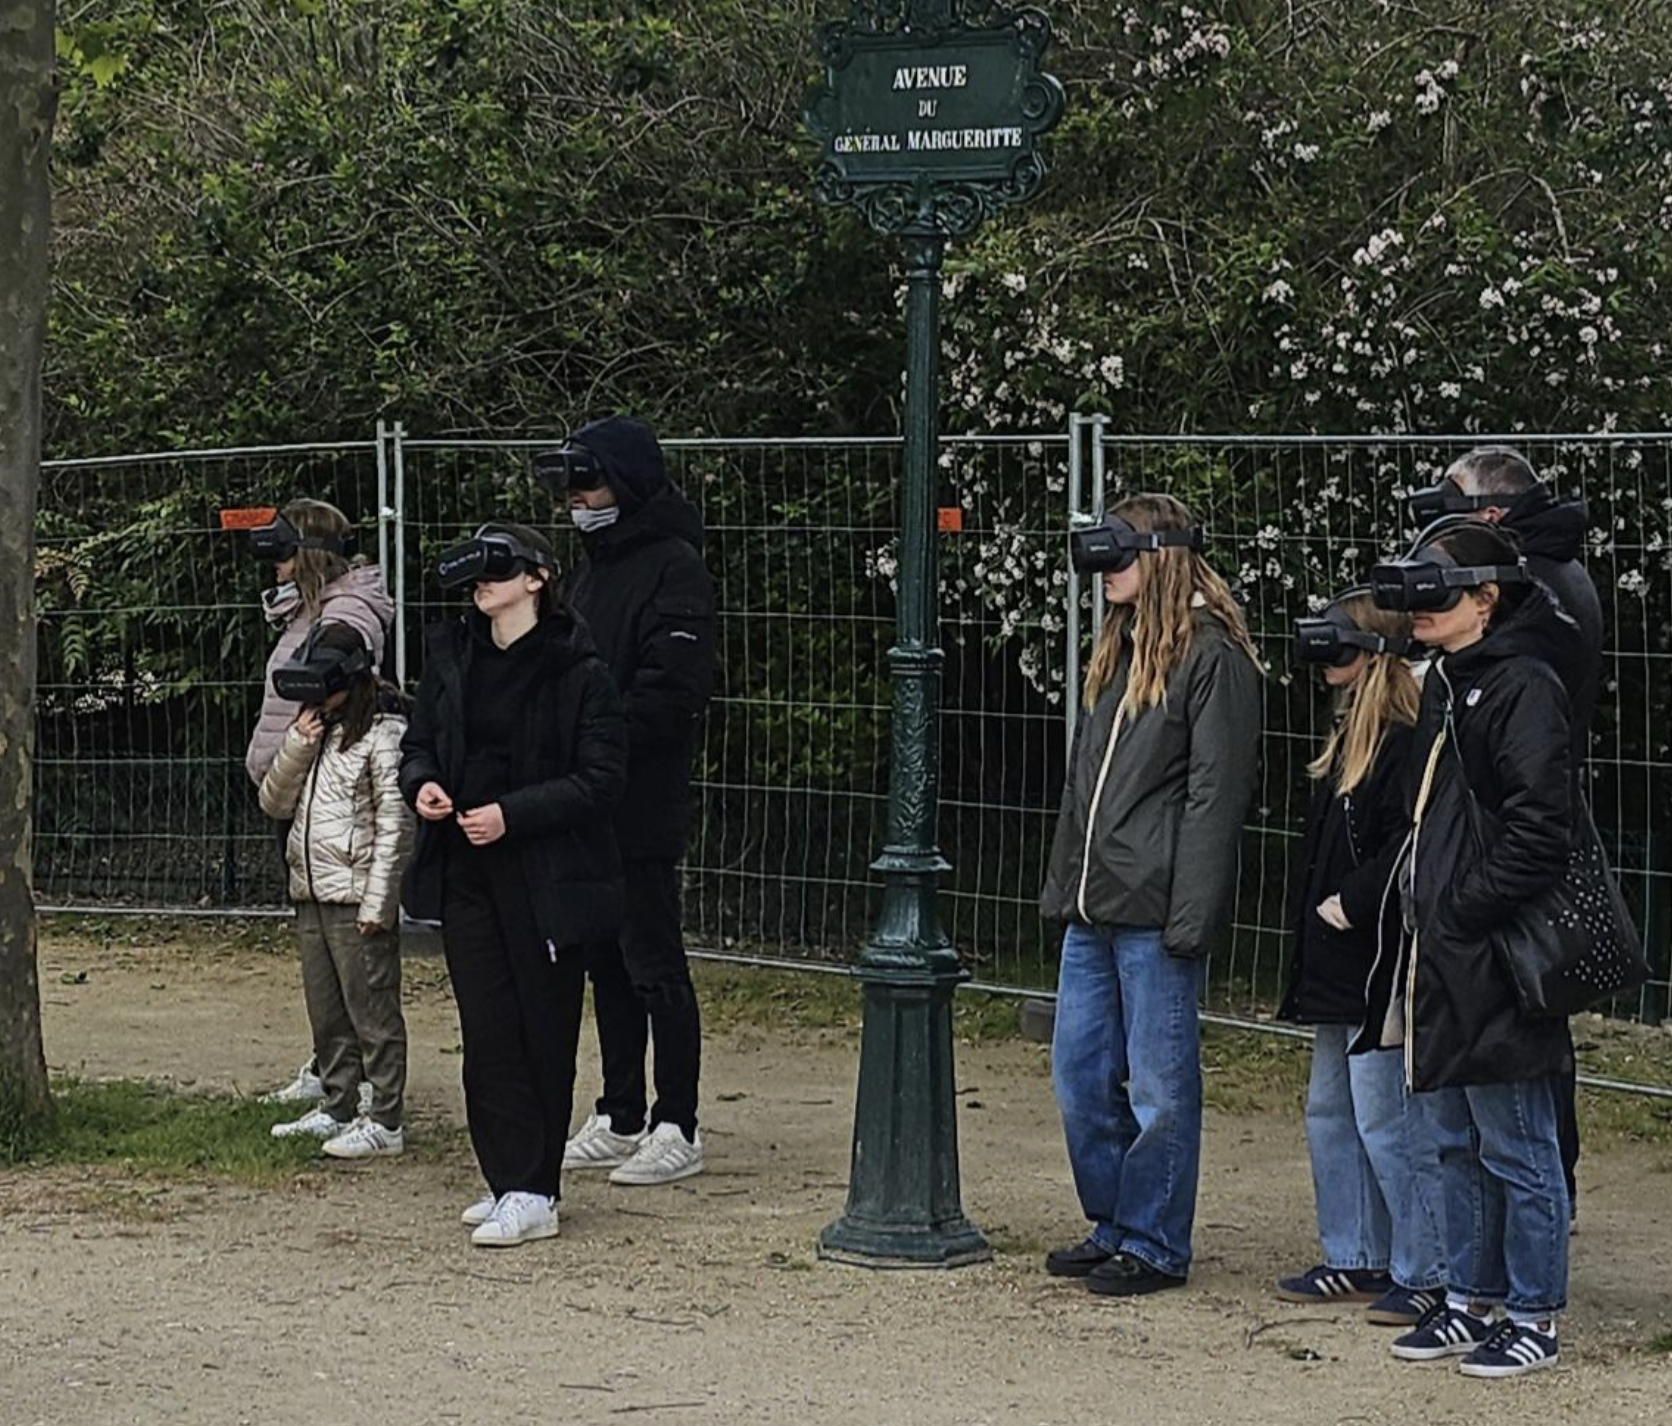 Group of people using VR headsets outdoors near a signpost